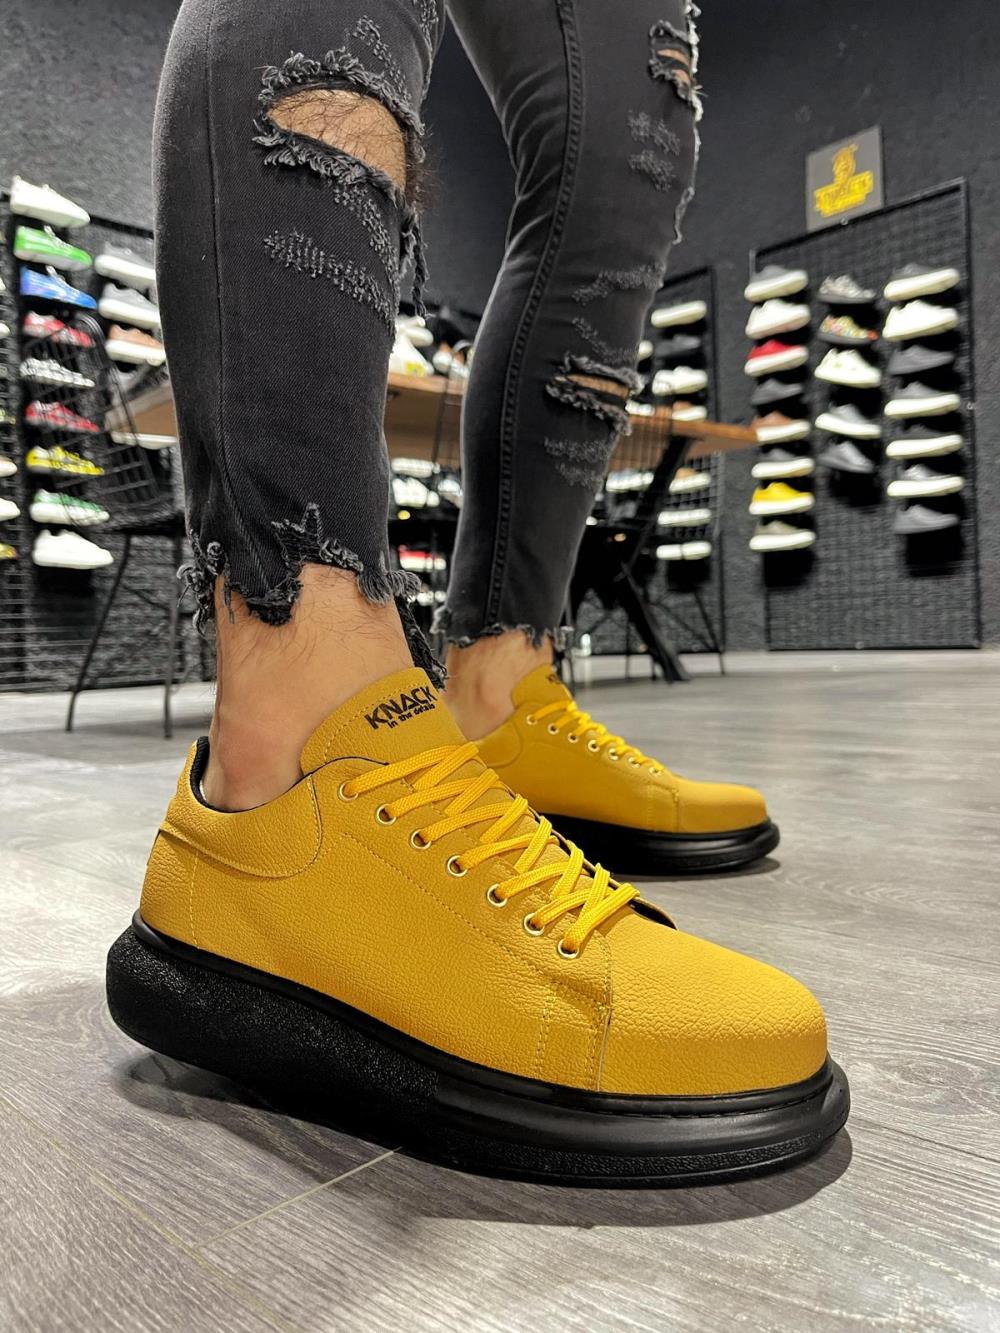 Knack High Sole Casual Shoes 045 Yellow (Black Sole) - STREETMODE ™